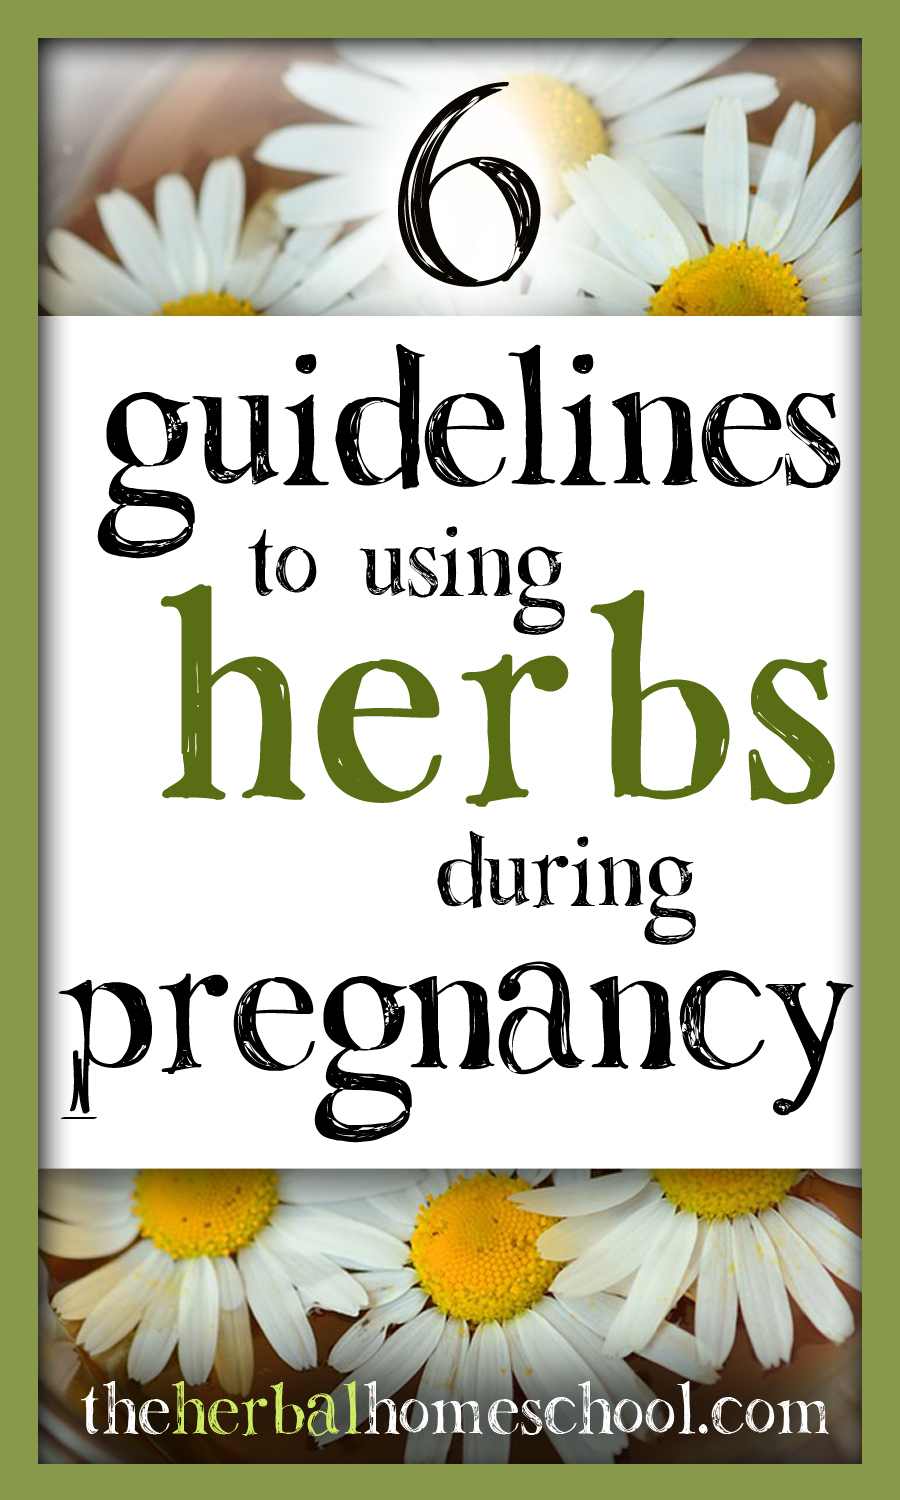 6 Guidelines to using herbs during pregnancy